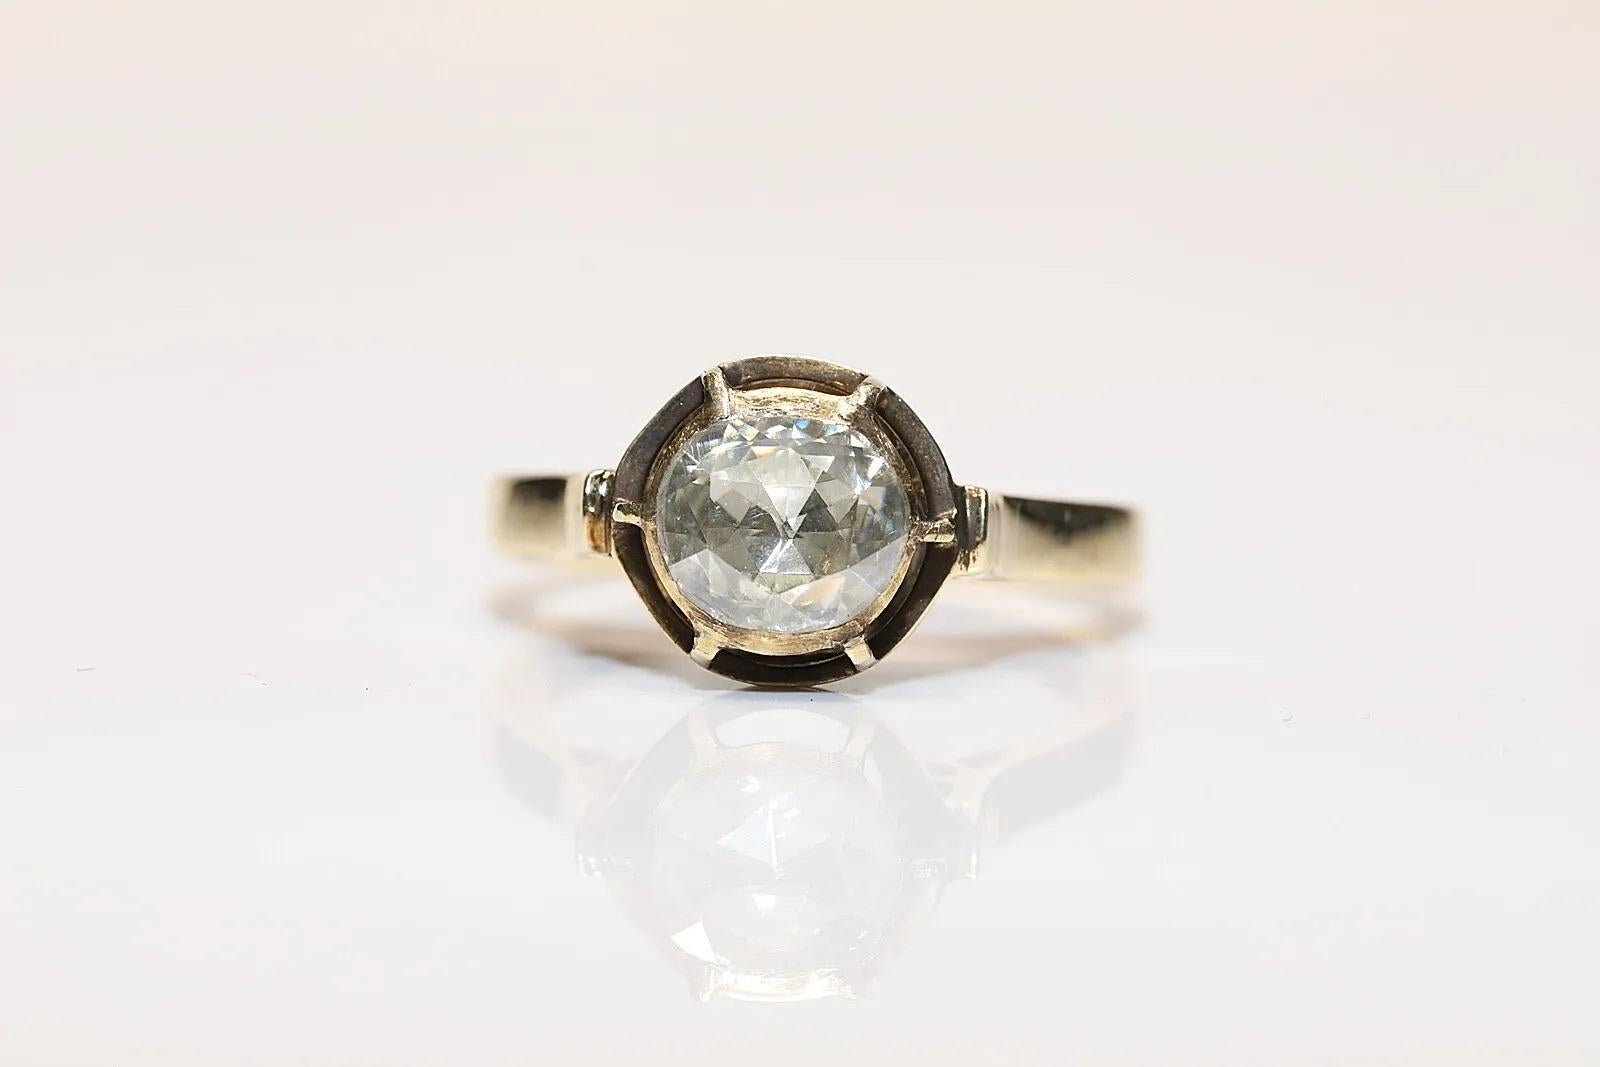 In very good condition.
Total weight is 3.3 grams.
Totally is diamond 0.48 carat.
The diamond is has H color and vs clarity.
Ring size is US 6 (We offer free resizing)
We can make any size.
Box is not included.
Please contact for any questions.